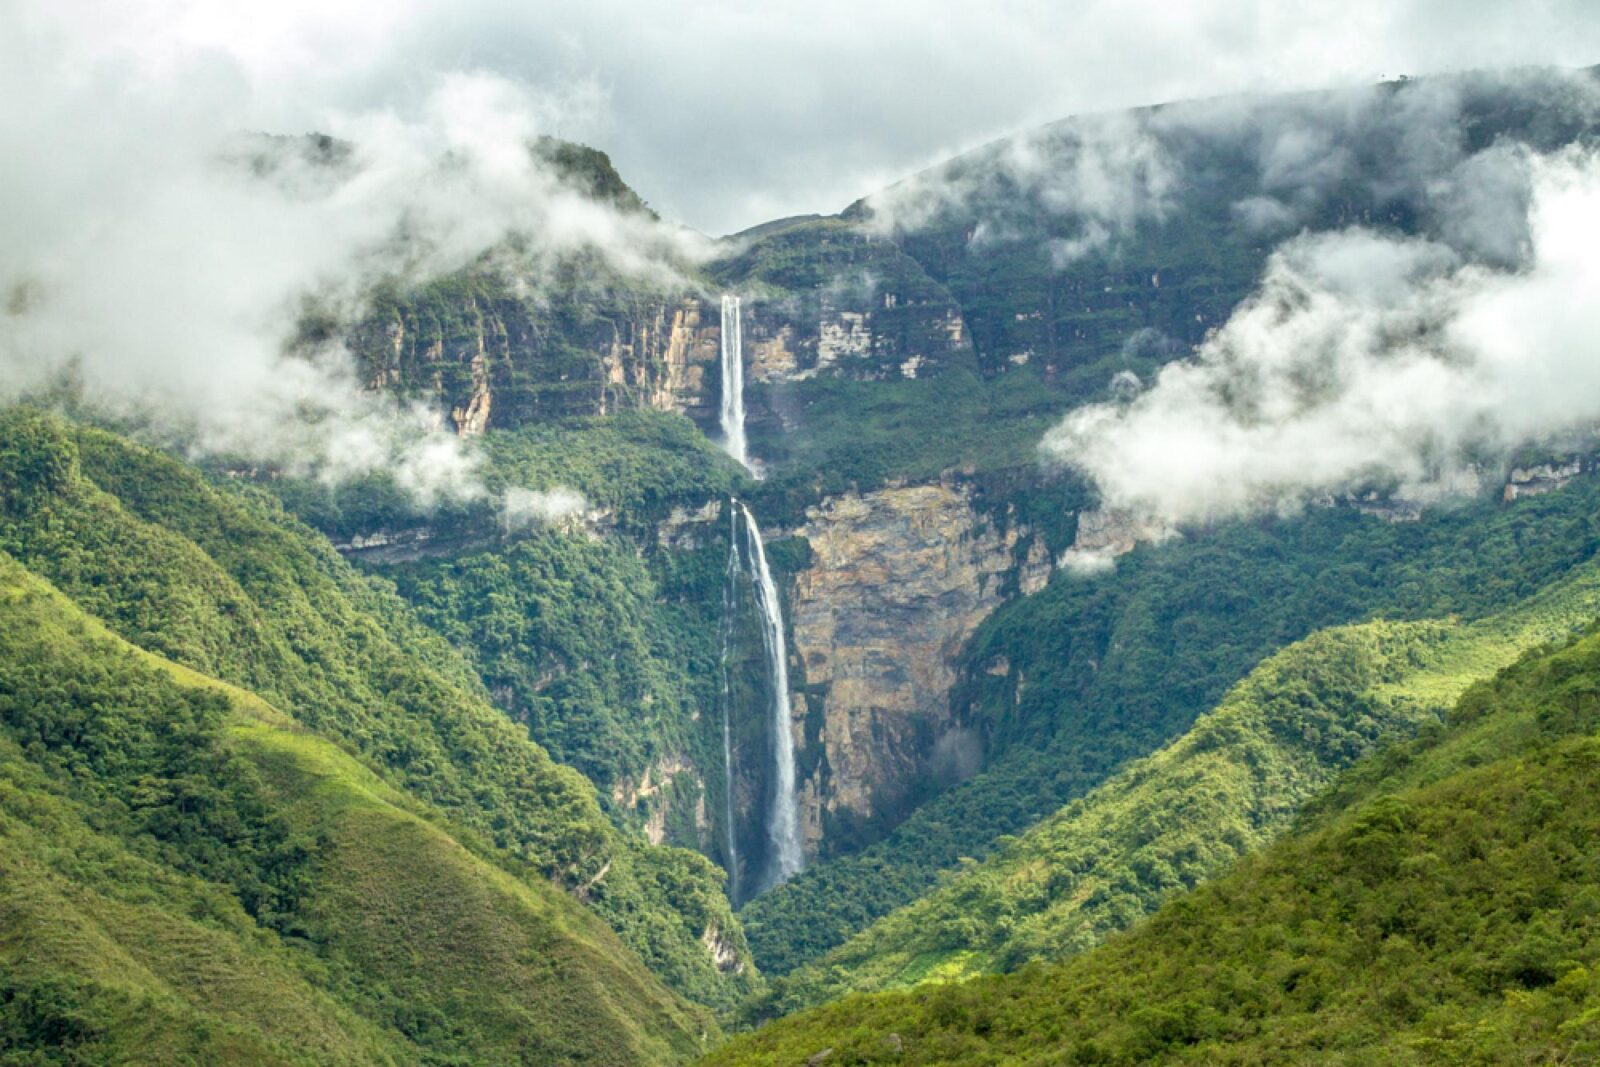 Here Are 24 Glorious Natural Attractions – Can You Match Them to Their Country? Gocta Waterfall, Peru